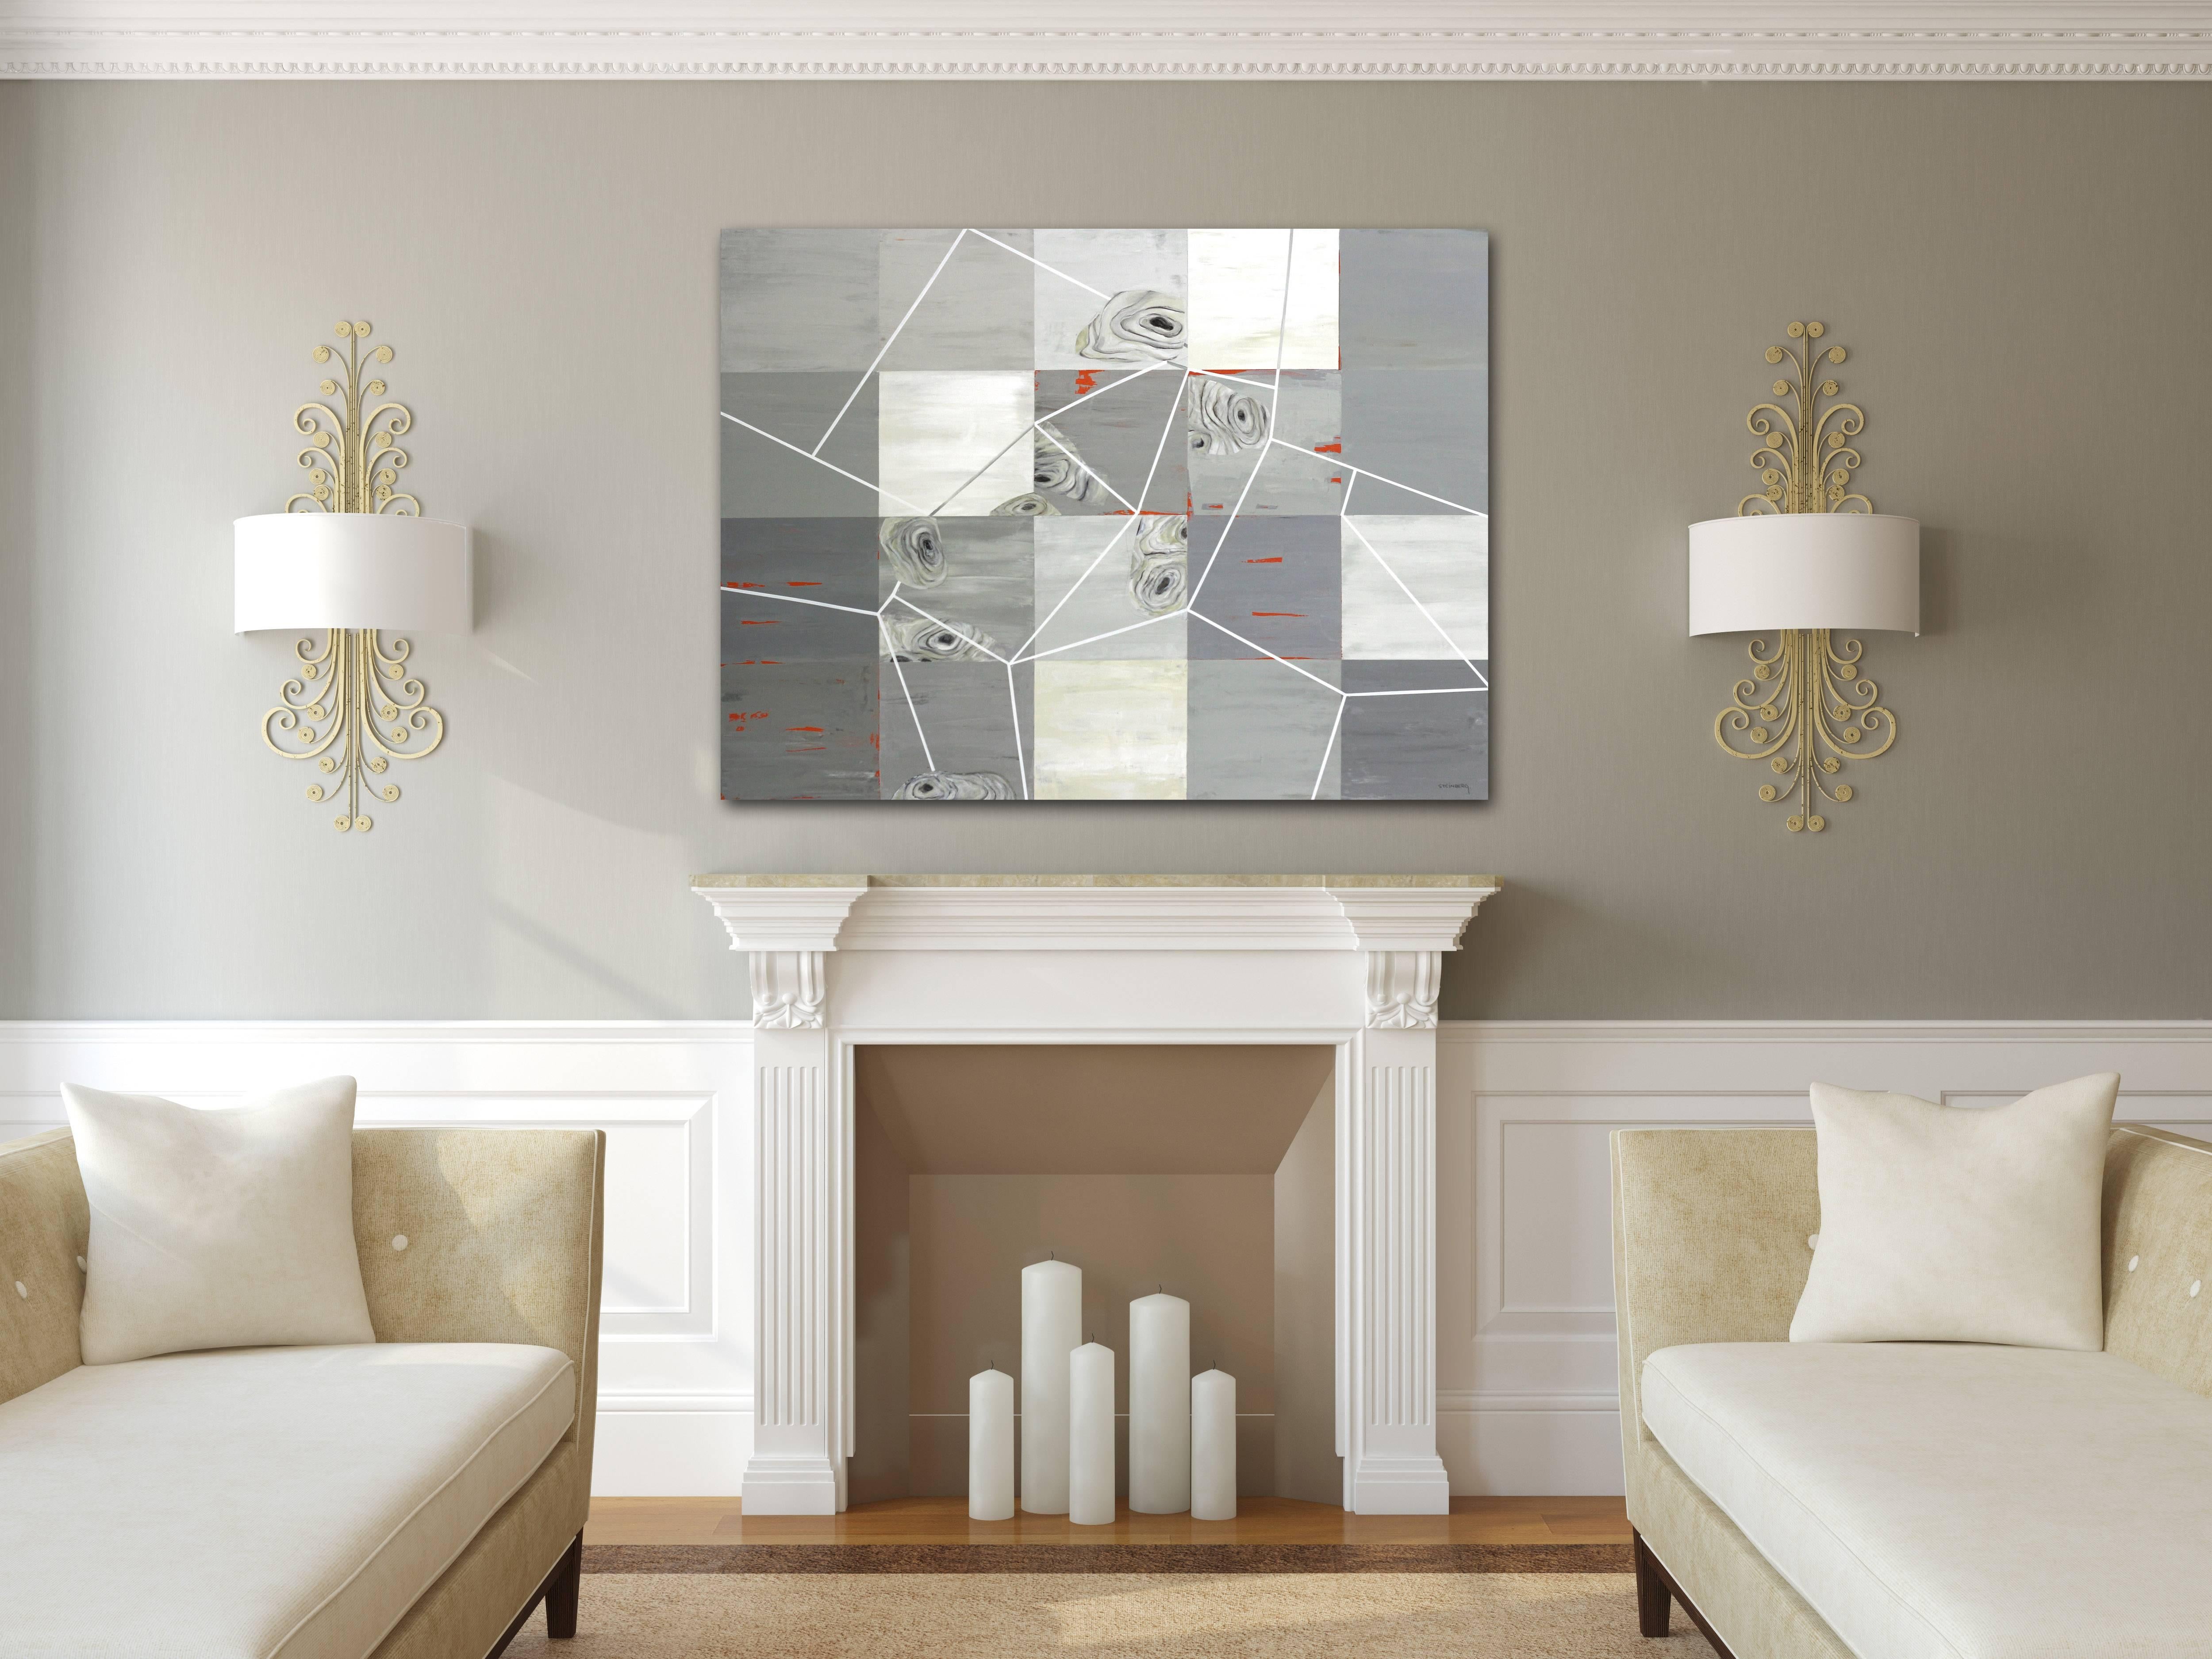 Archipelago - Original Abstract Geometric Neutral Grey and White Artwork - Painting by Heny Steinberg